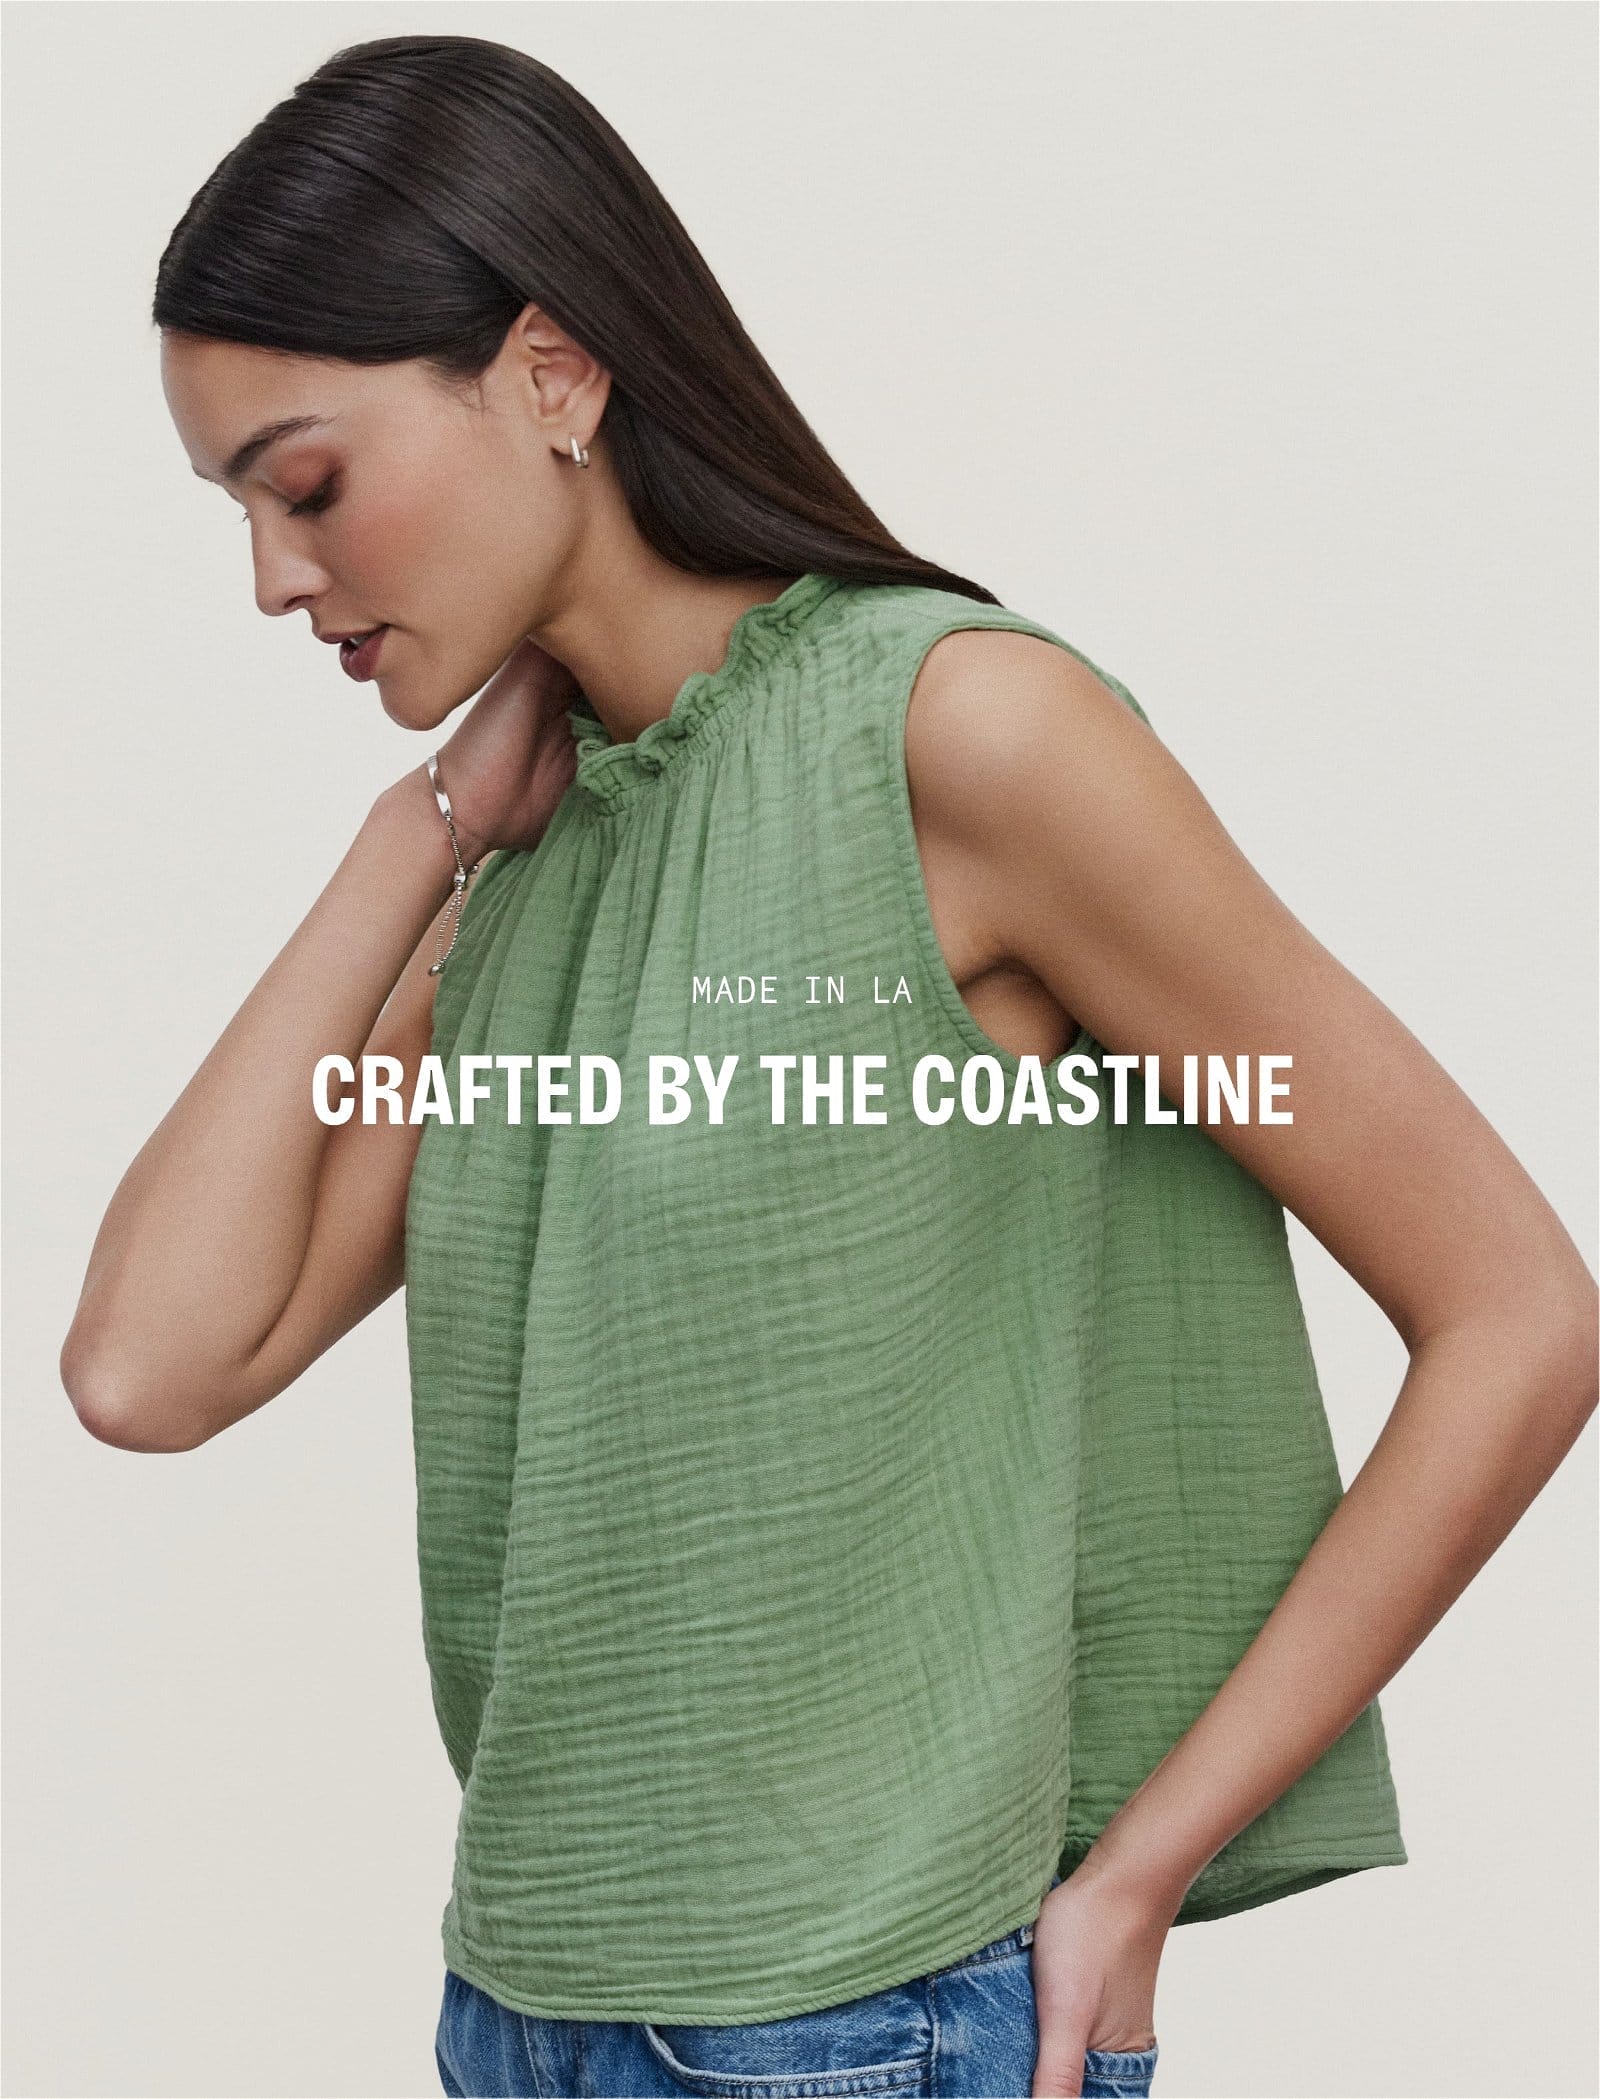 MADE IN LA: CRAFTED BY THE COASTLINE